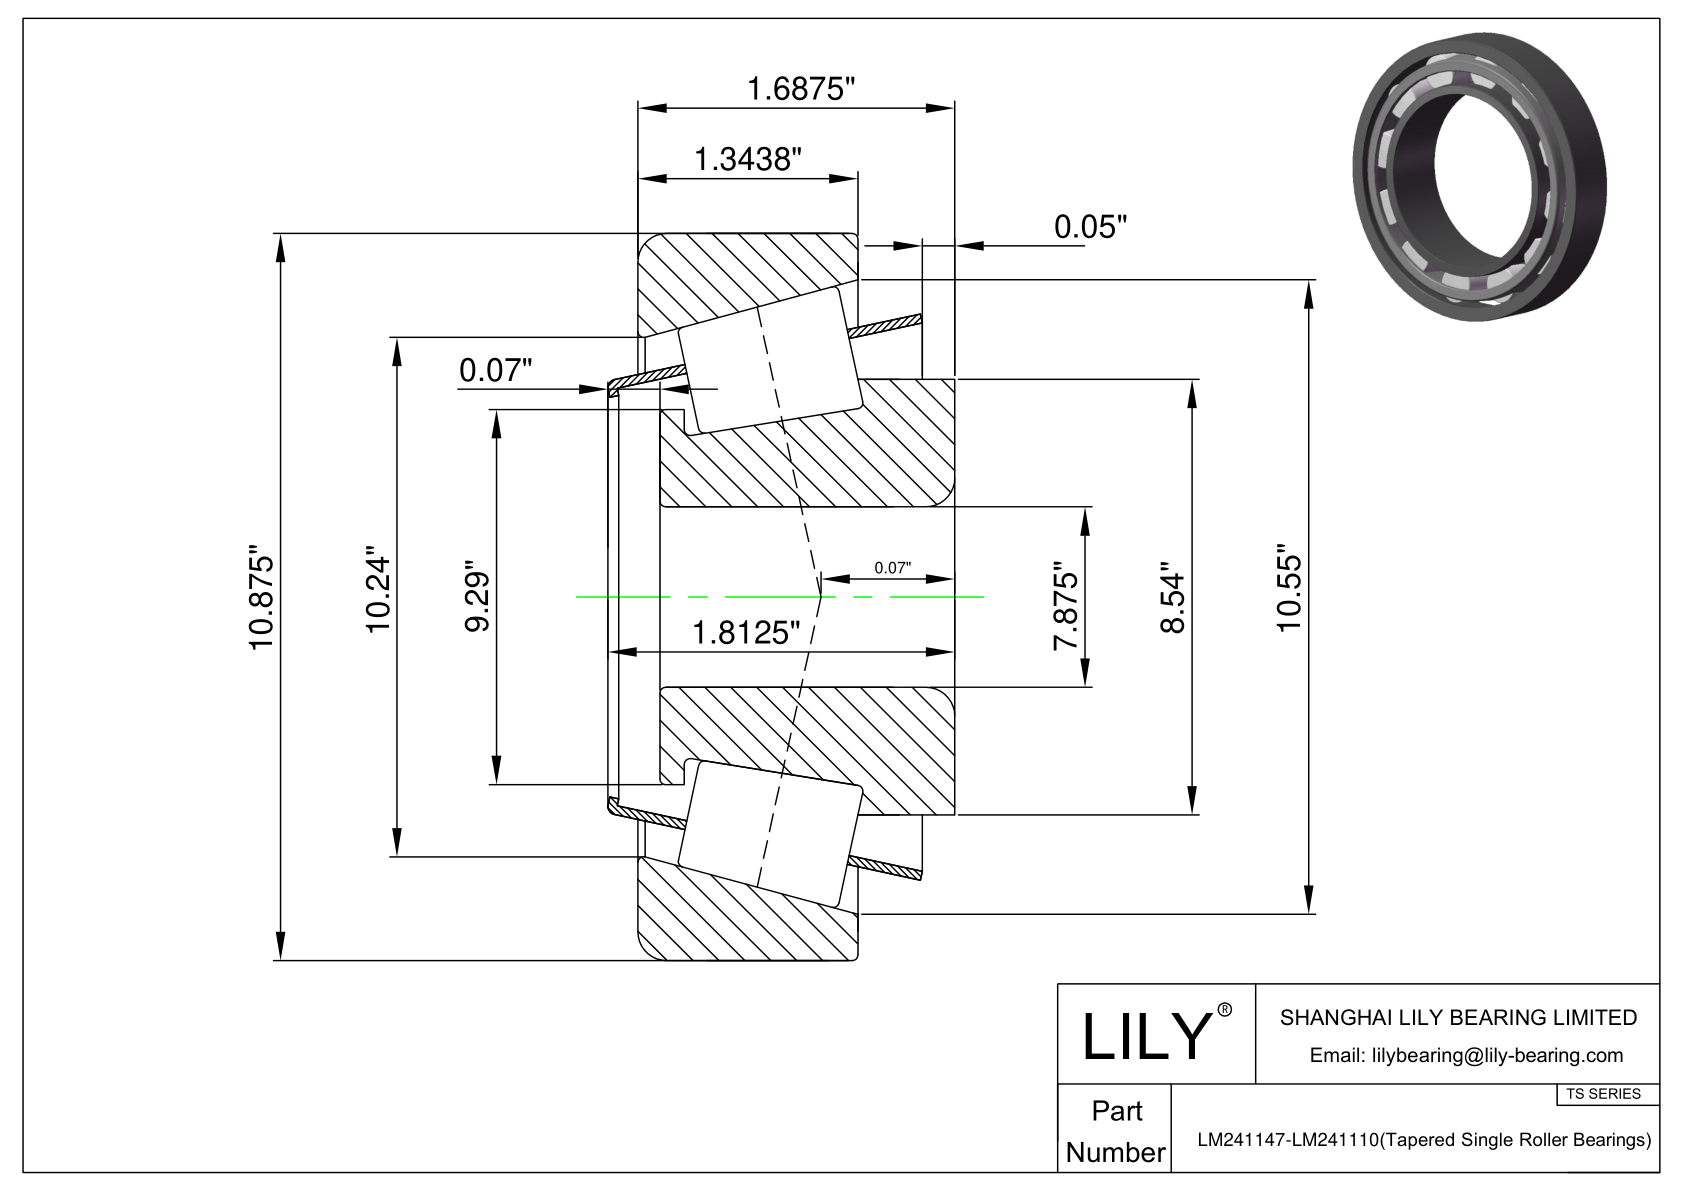 LM241147-LM241110 TS (Tapered Single Roller Bearings) (Imperial) cad drawing